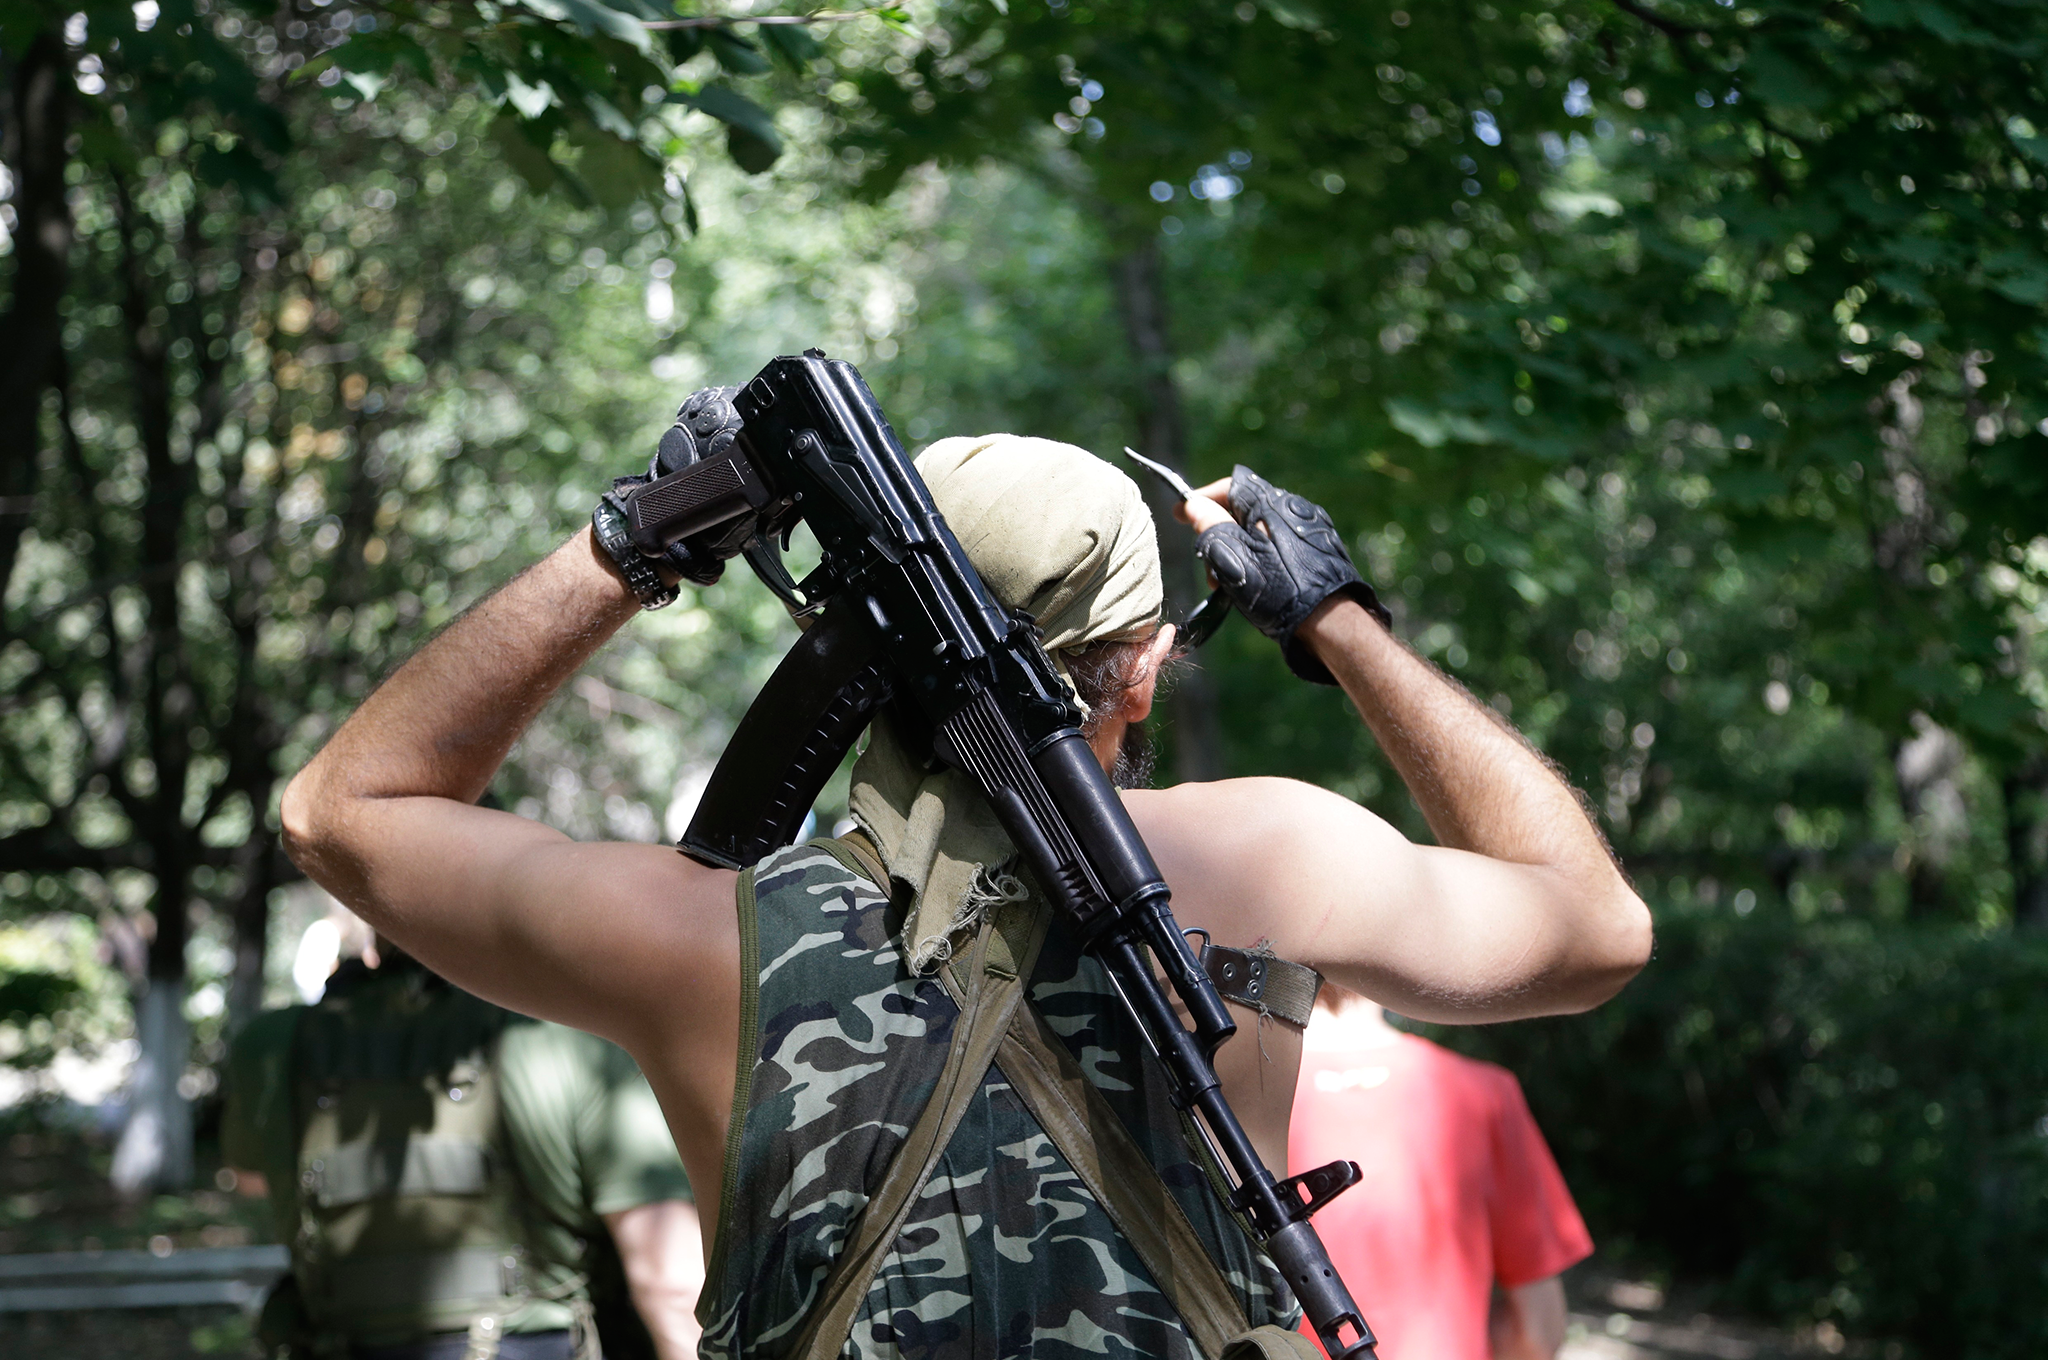 A Pro-Russian rebel adjusts his weapon in Donetsk, eastern Ukraine. Air strikes and artillery fire between pro-Russian separatists and Ukrainian troops in the eastern city of Donetsk have brought the violence closer than ever to the city center